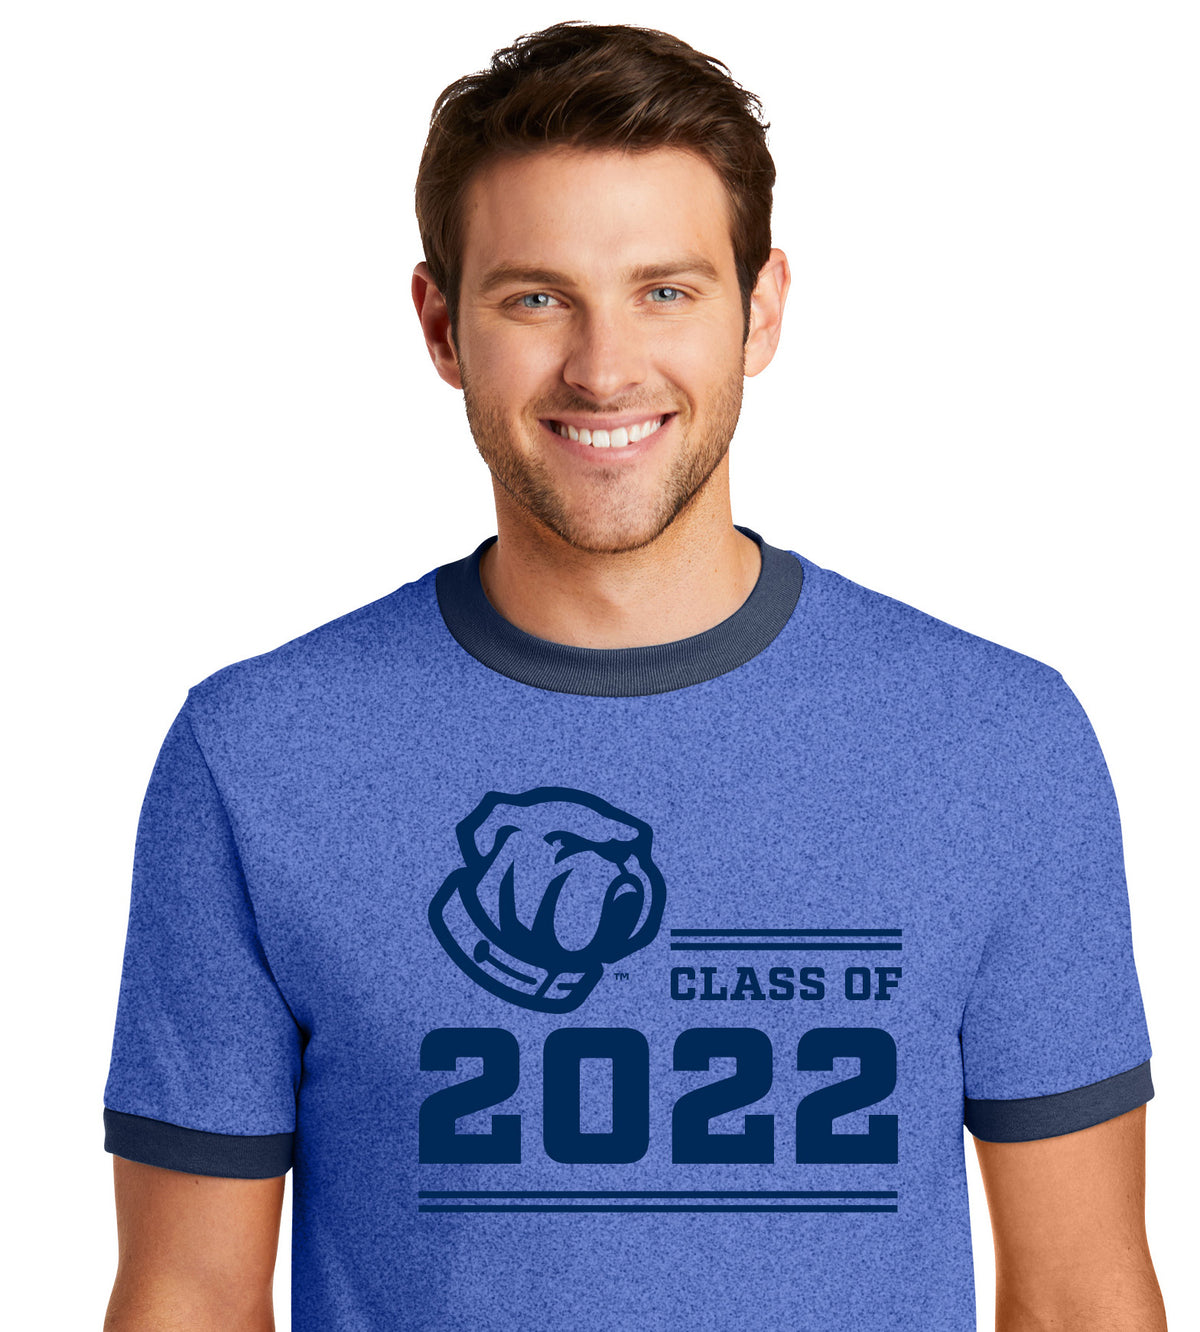 Class of 2022 Ringer Tee-Heather royal-Navy01